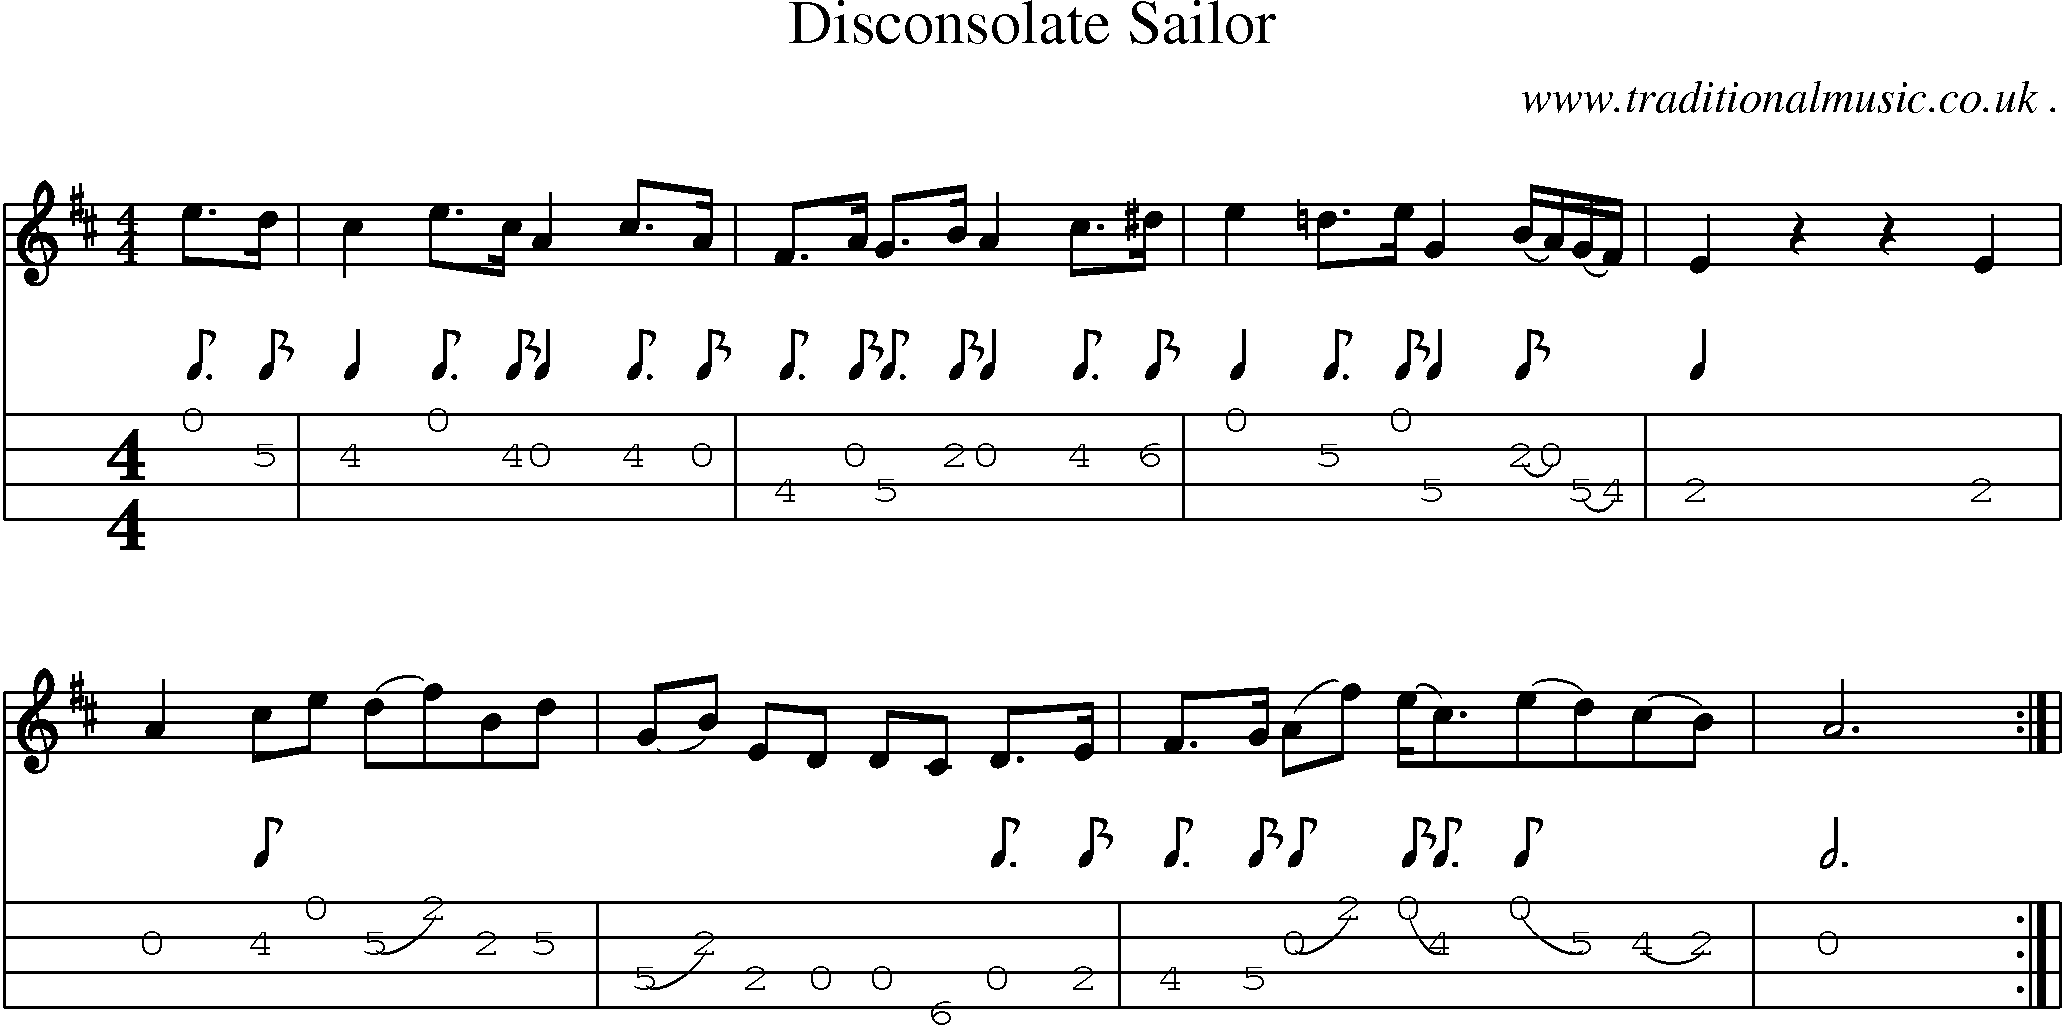 Sheet-Music and Mandolin Tabs for Disconsolate Sailor